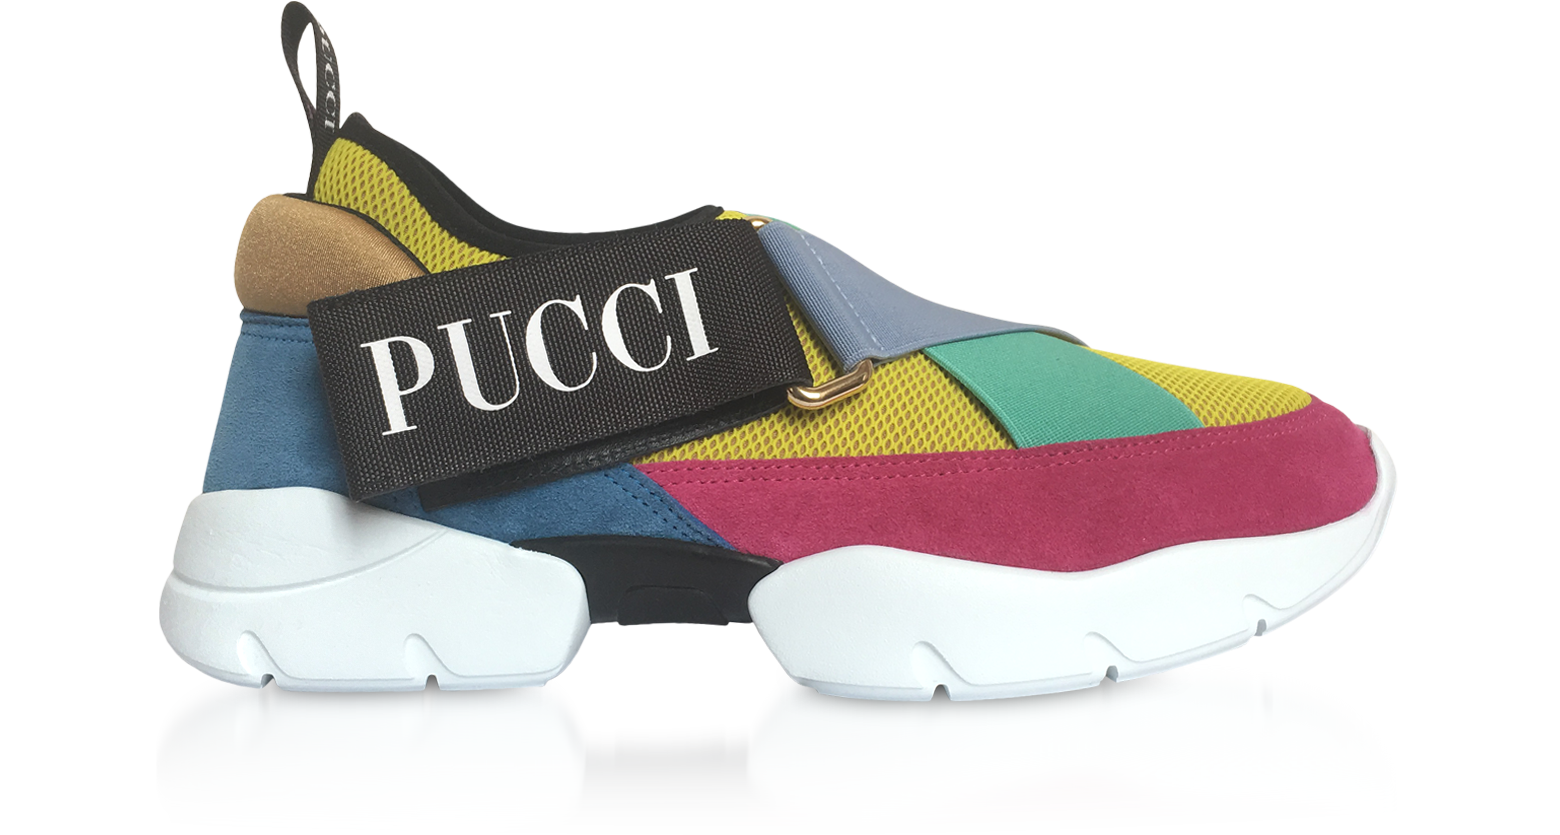 Emilio Pucci Sneakers of the World